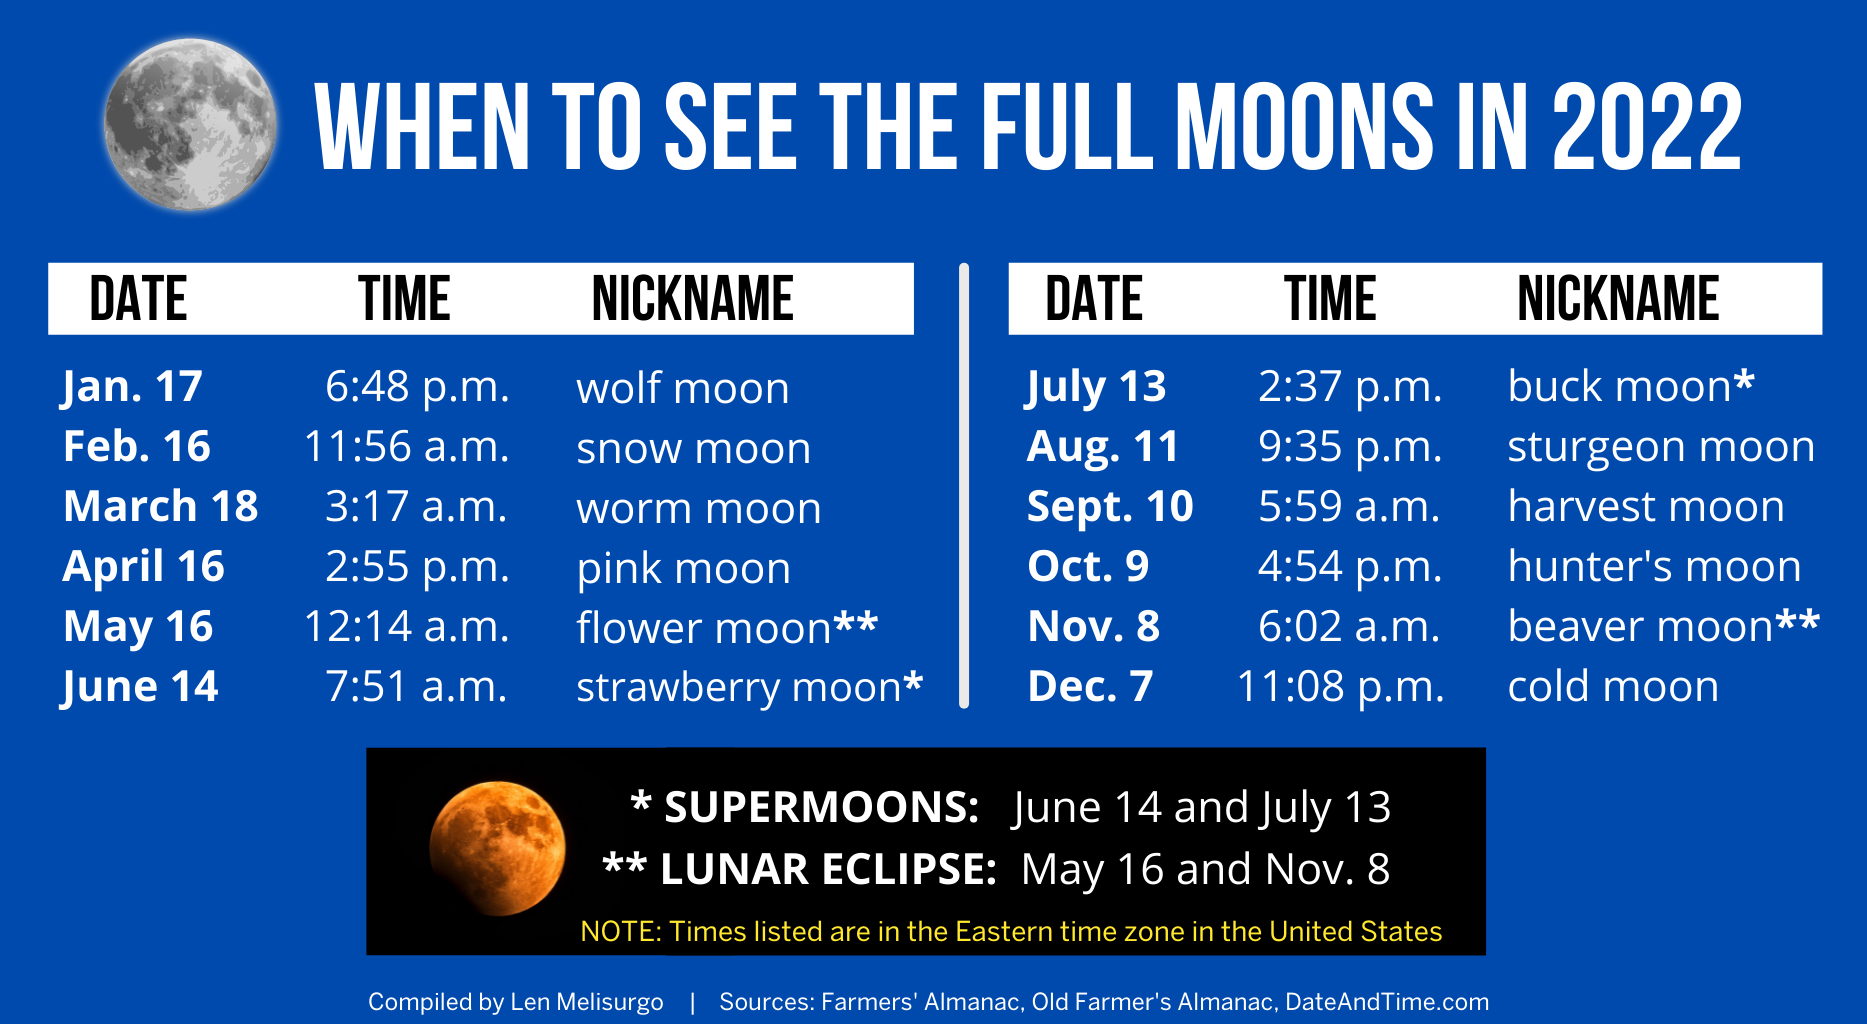 Full Moon Calendar 2022 Florida The 12 Full Moons In 2022 Will Include 2 Supermoons, 2 Lunar Eclipses -  Nj.com